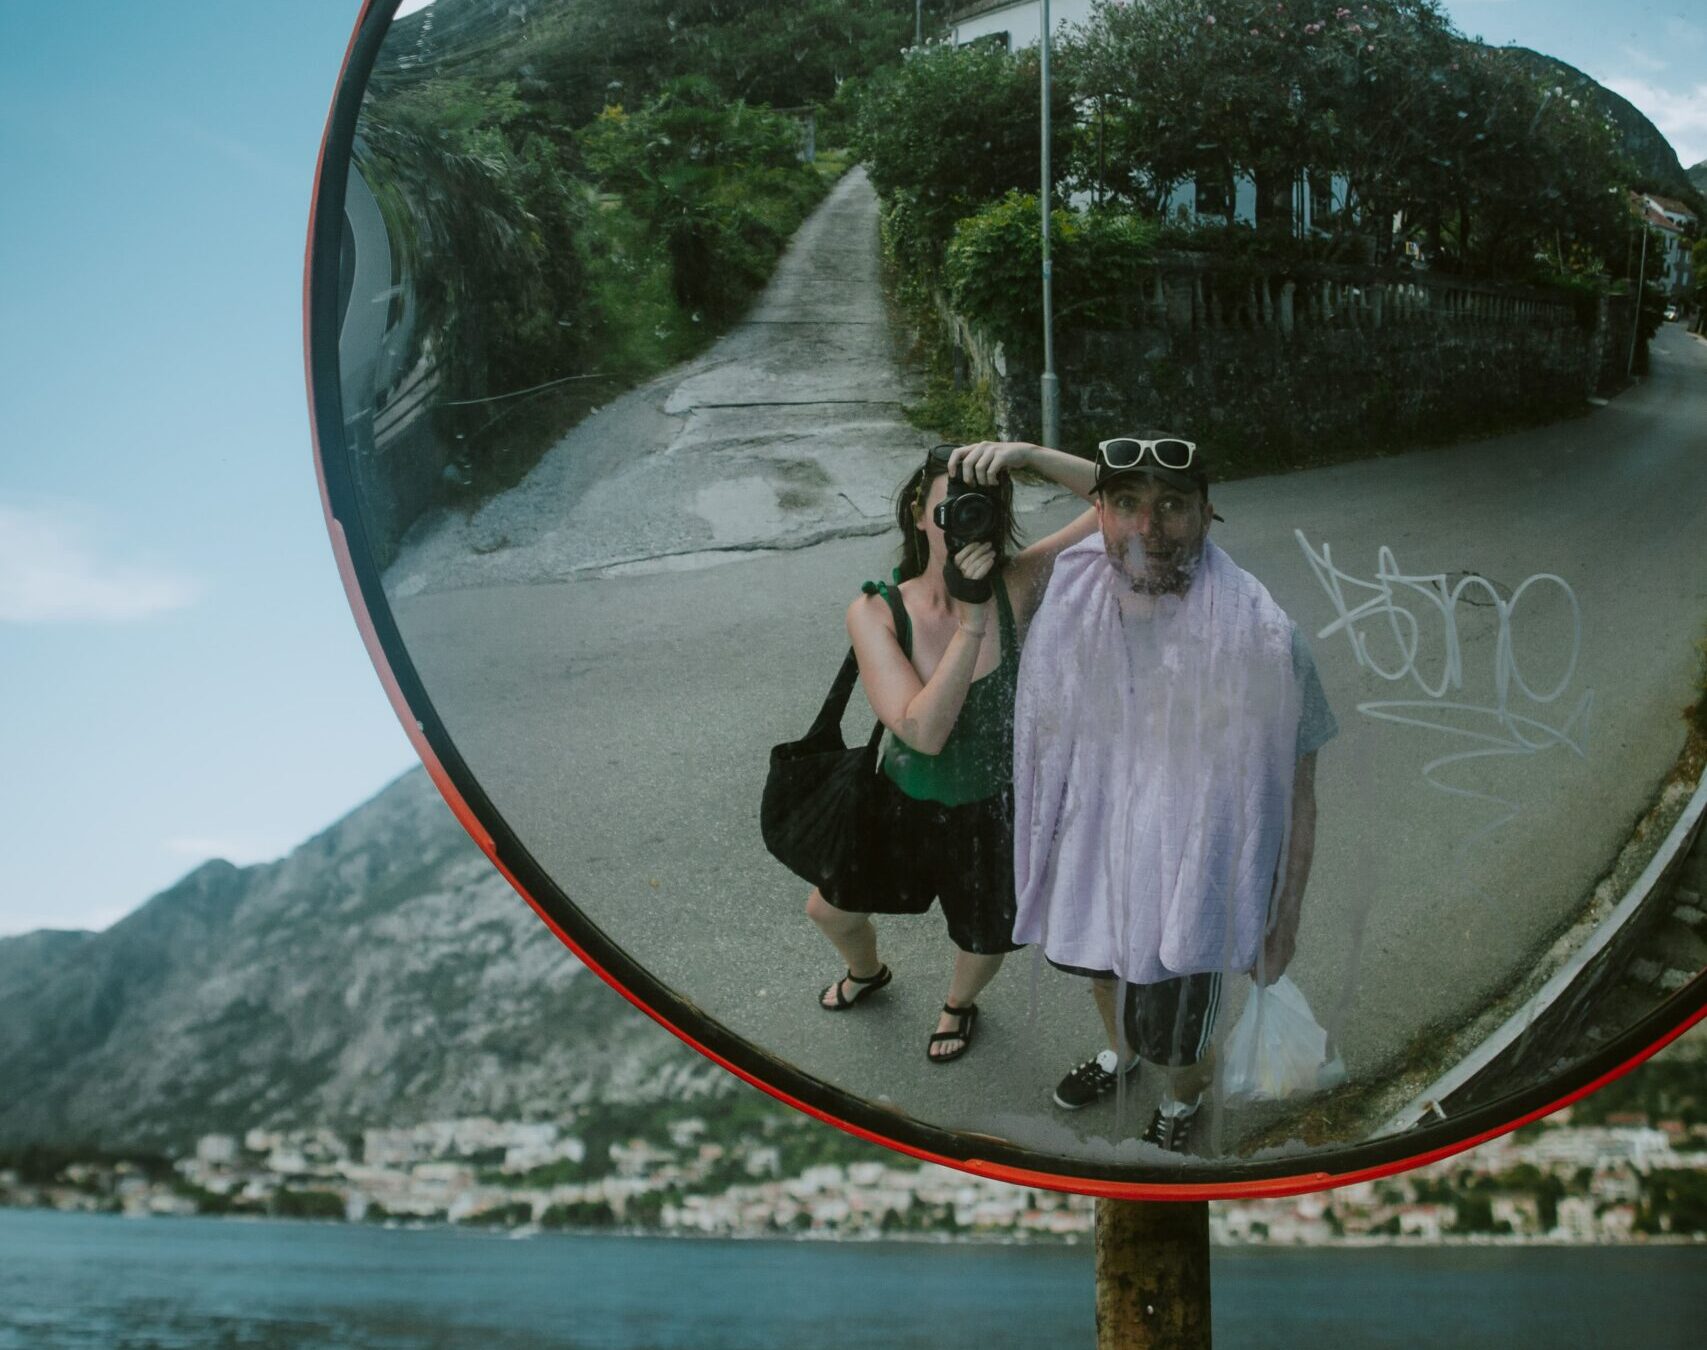 Holly taking a photo in a traffic mirror in Kotor